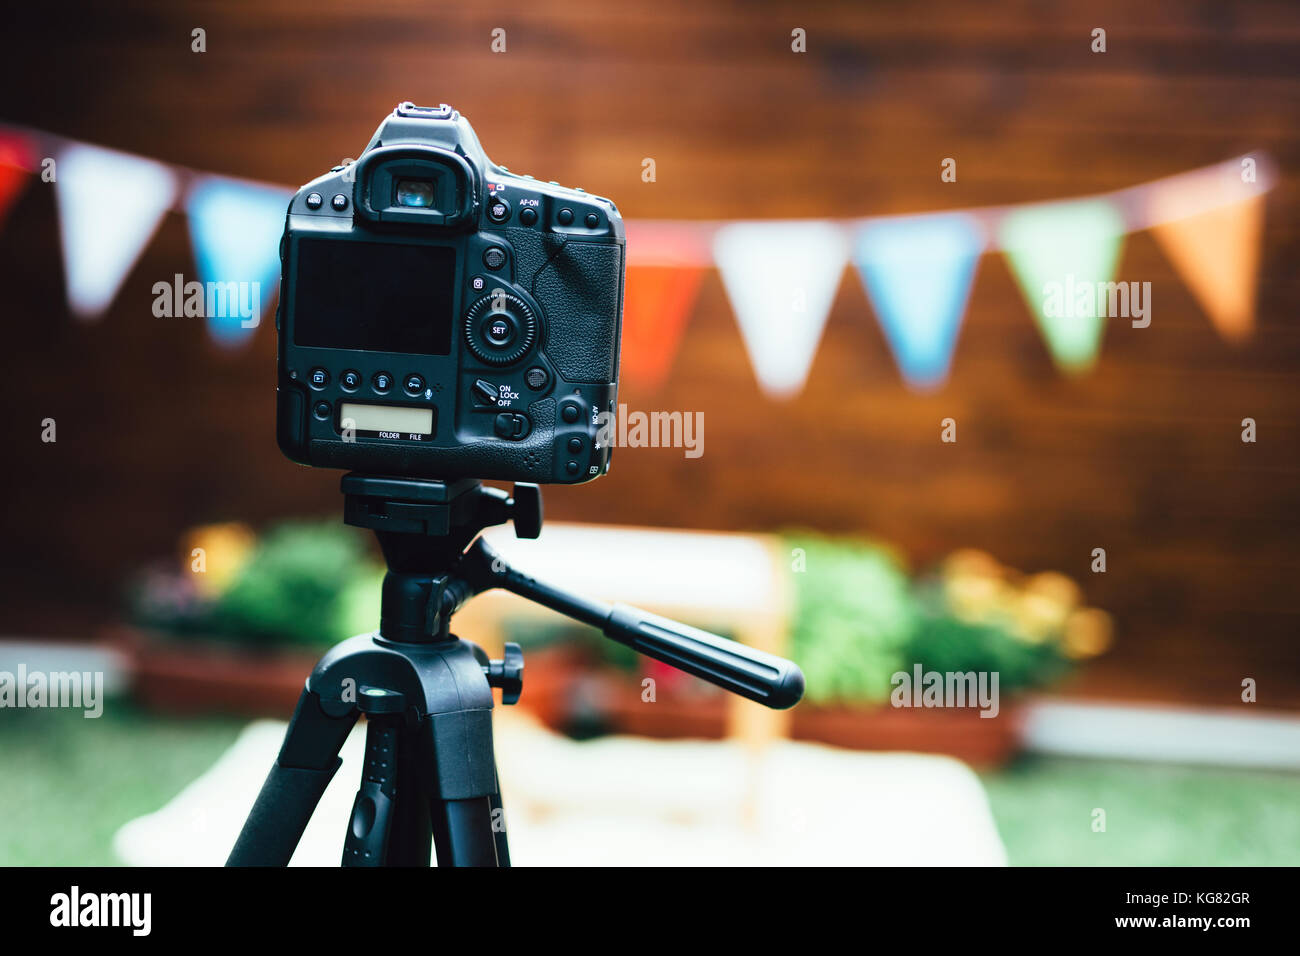 Picture of digital camera placed on tripod Stock Photo